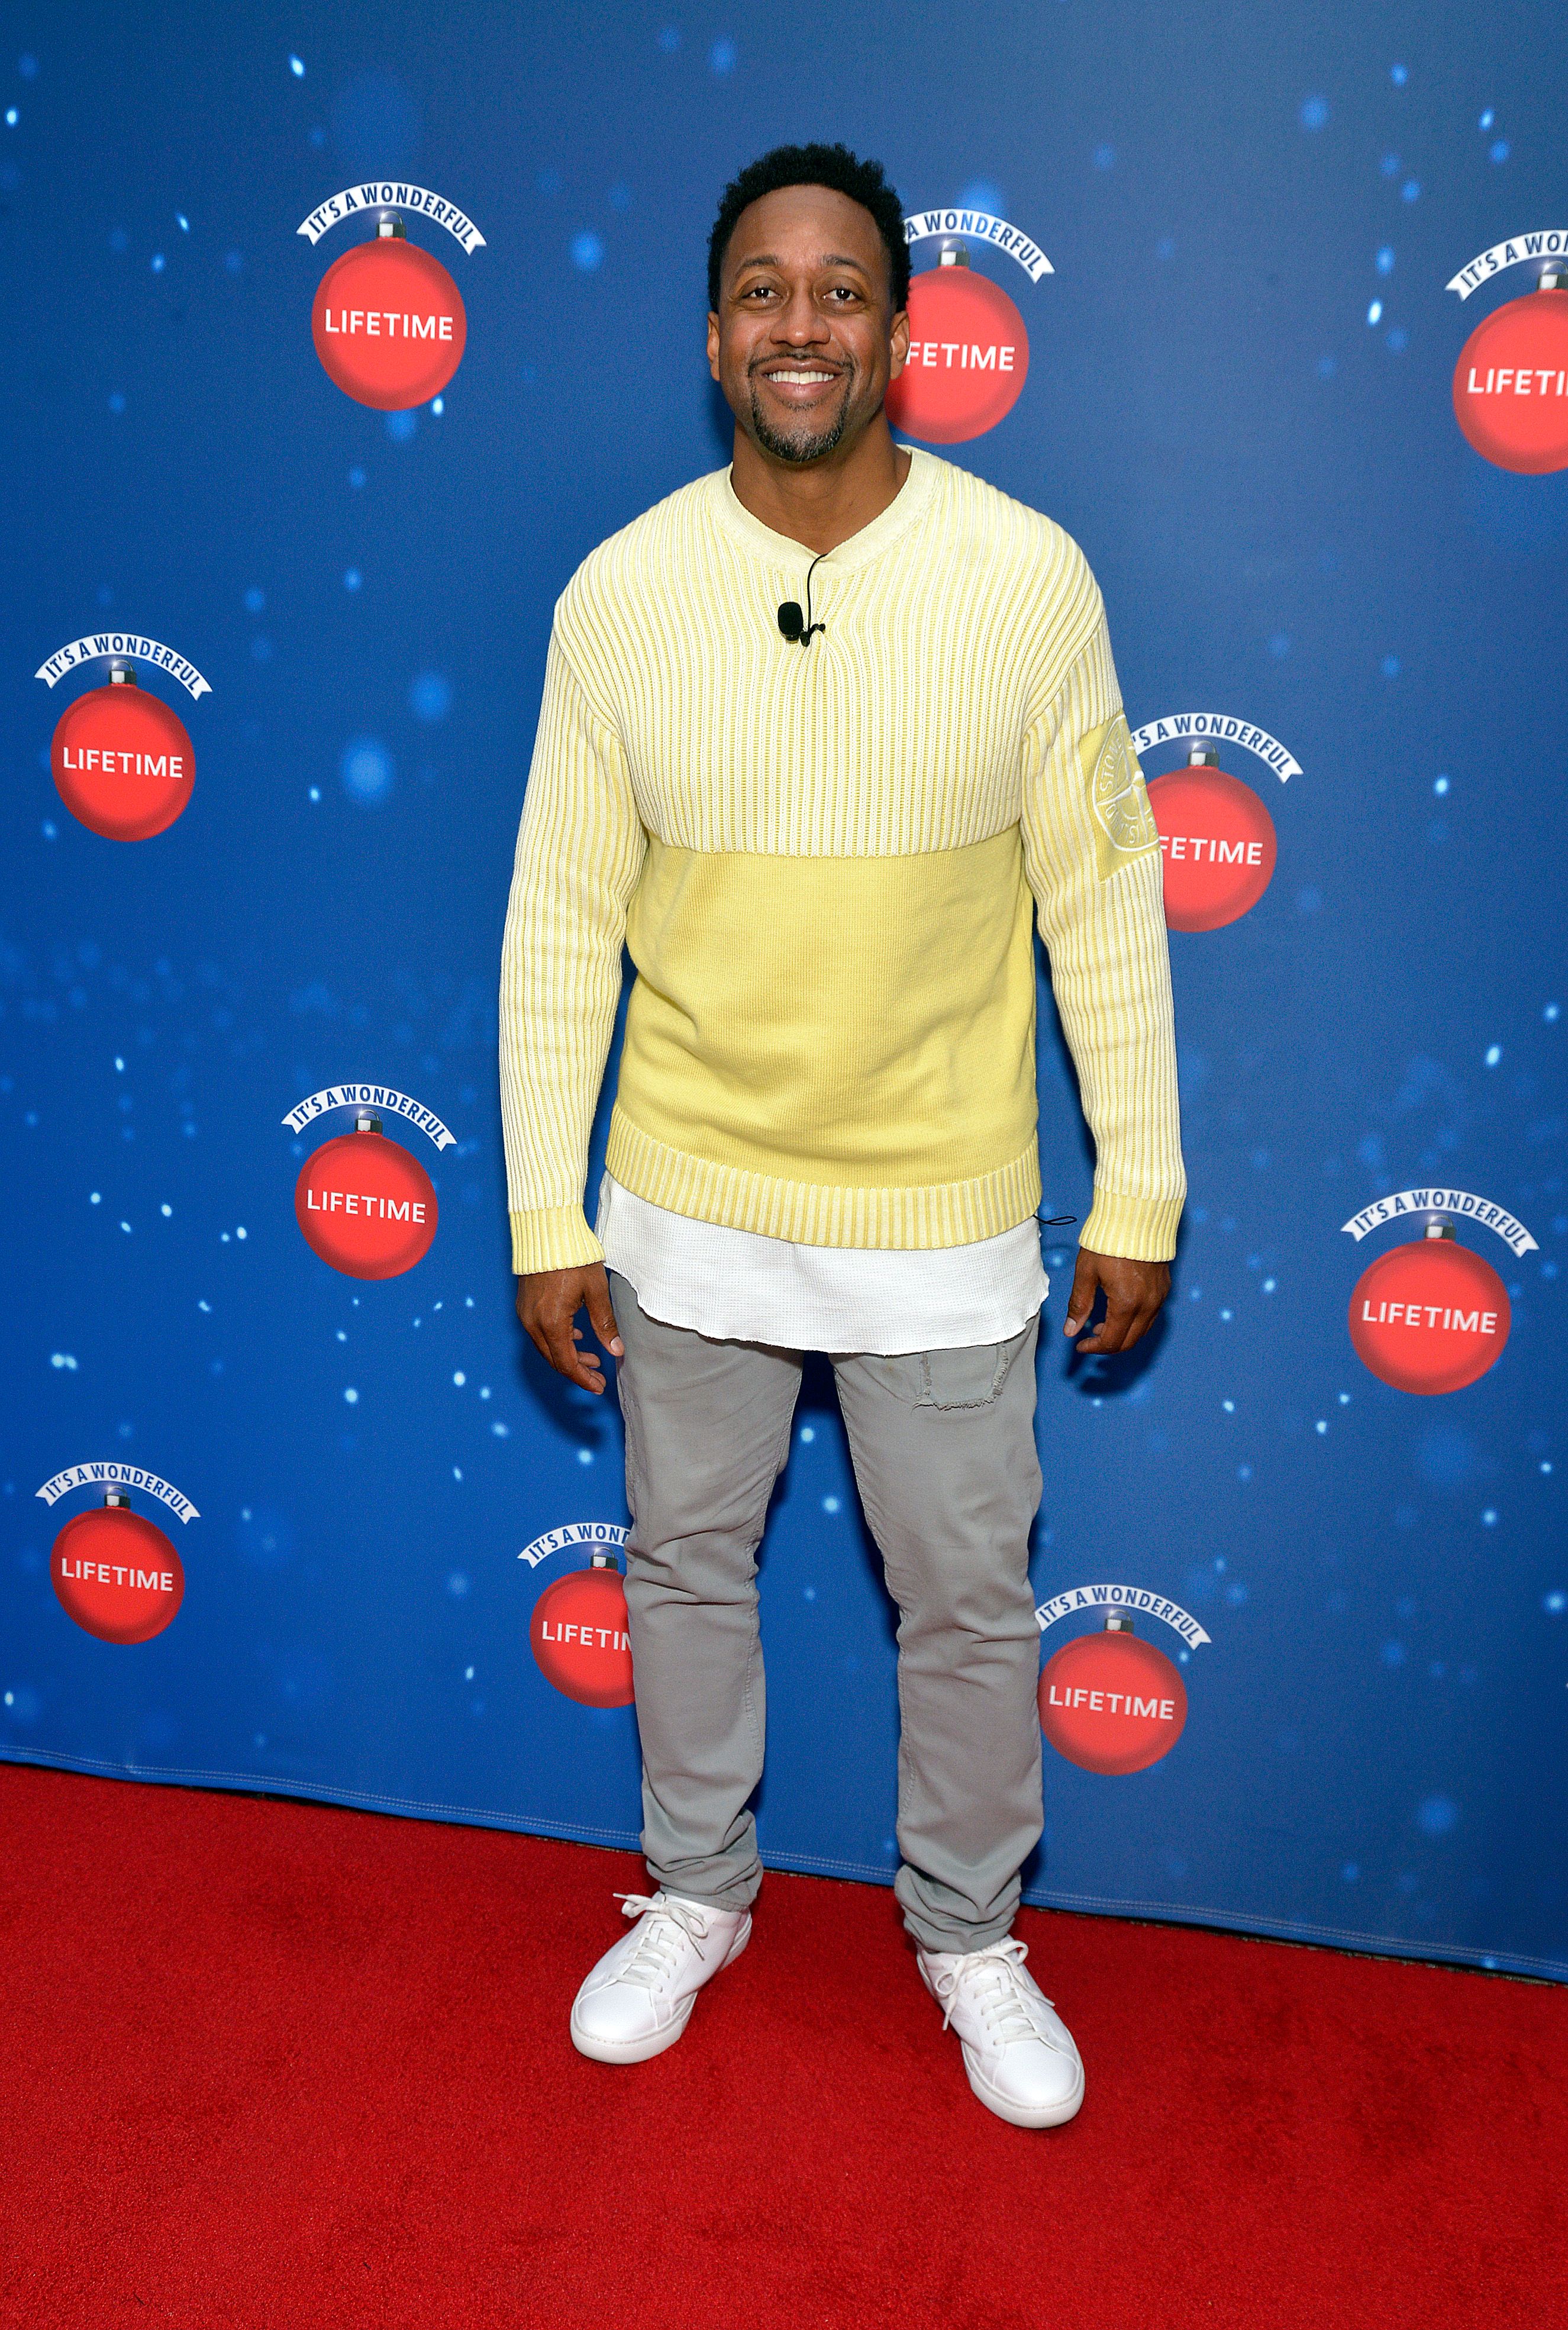 Jaleel White during the Say "Santa!" with It's A Wonderful Lifetime photo experience at Glendale Galleria on November 09, 2019 in Glendale, California. | Source: Getty Images